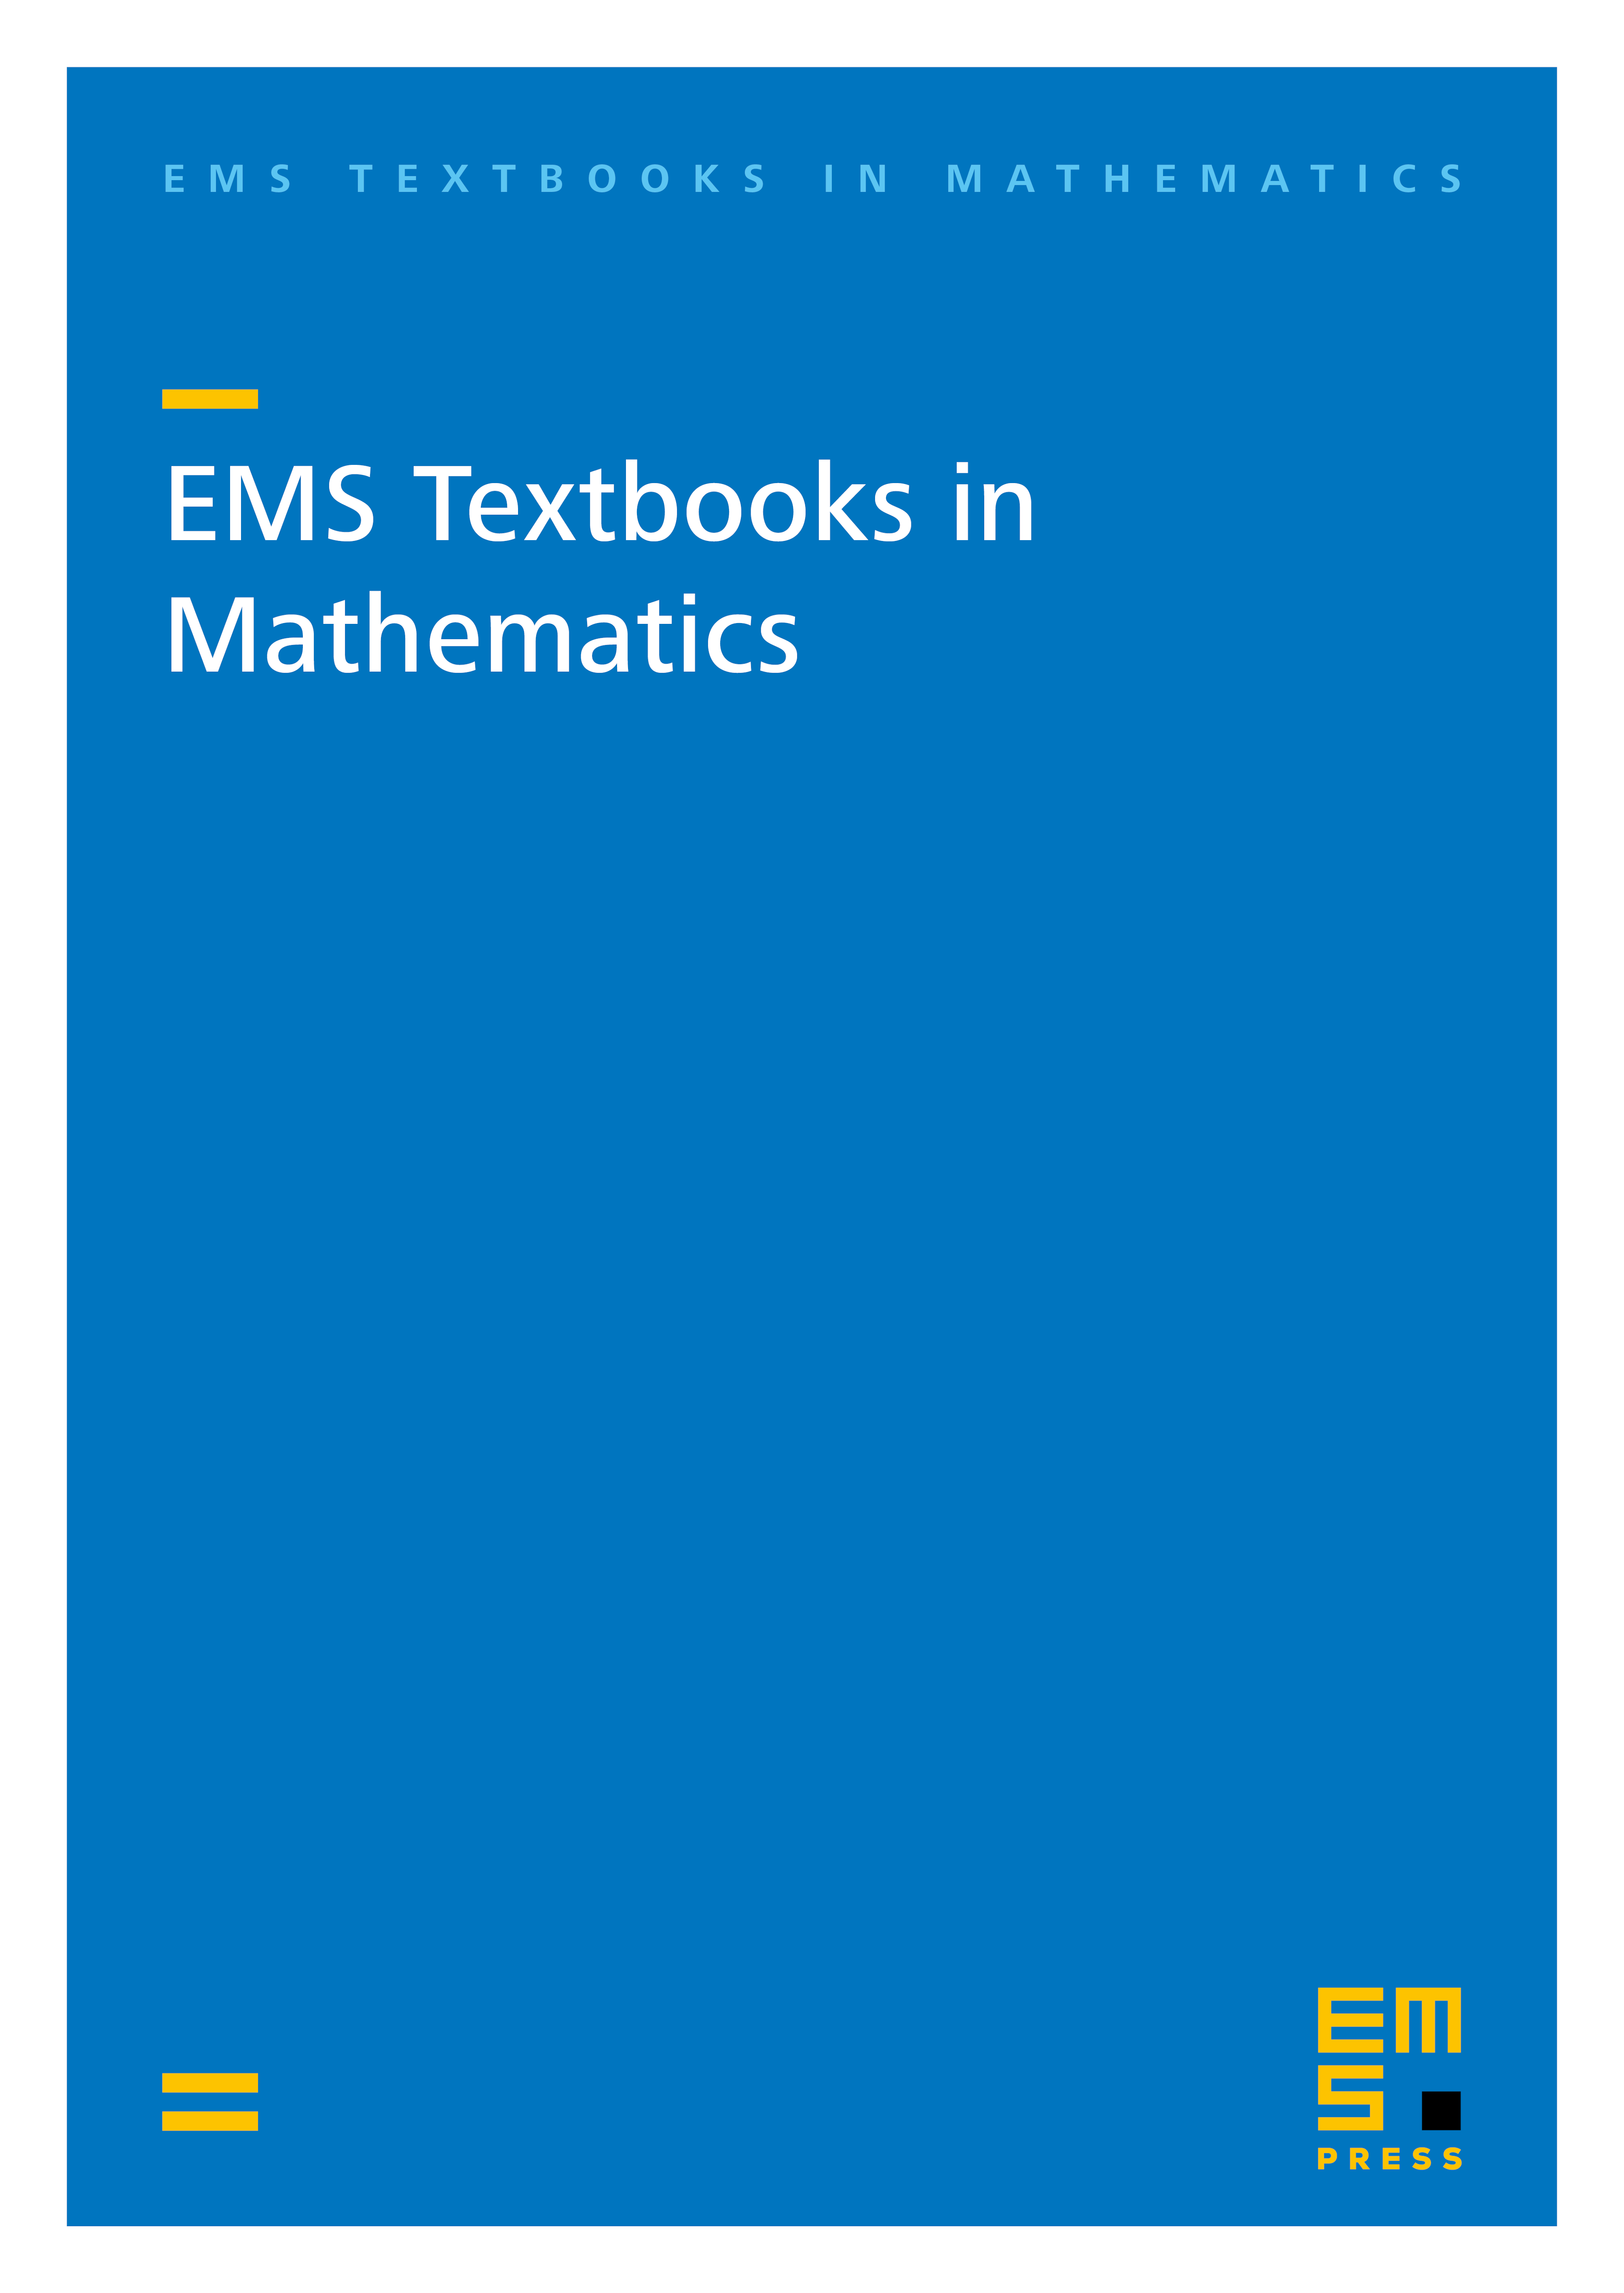 EMS Textbooks in Mathematics cover